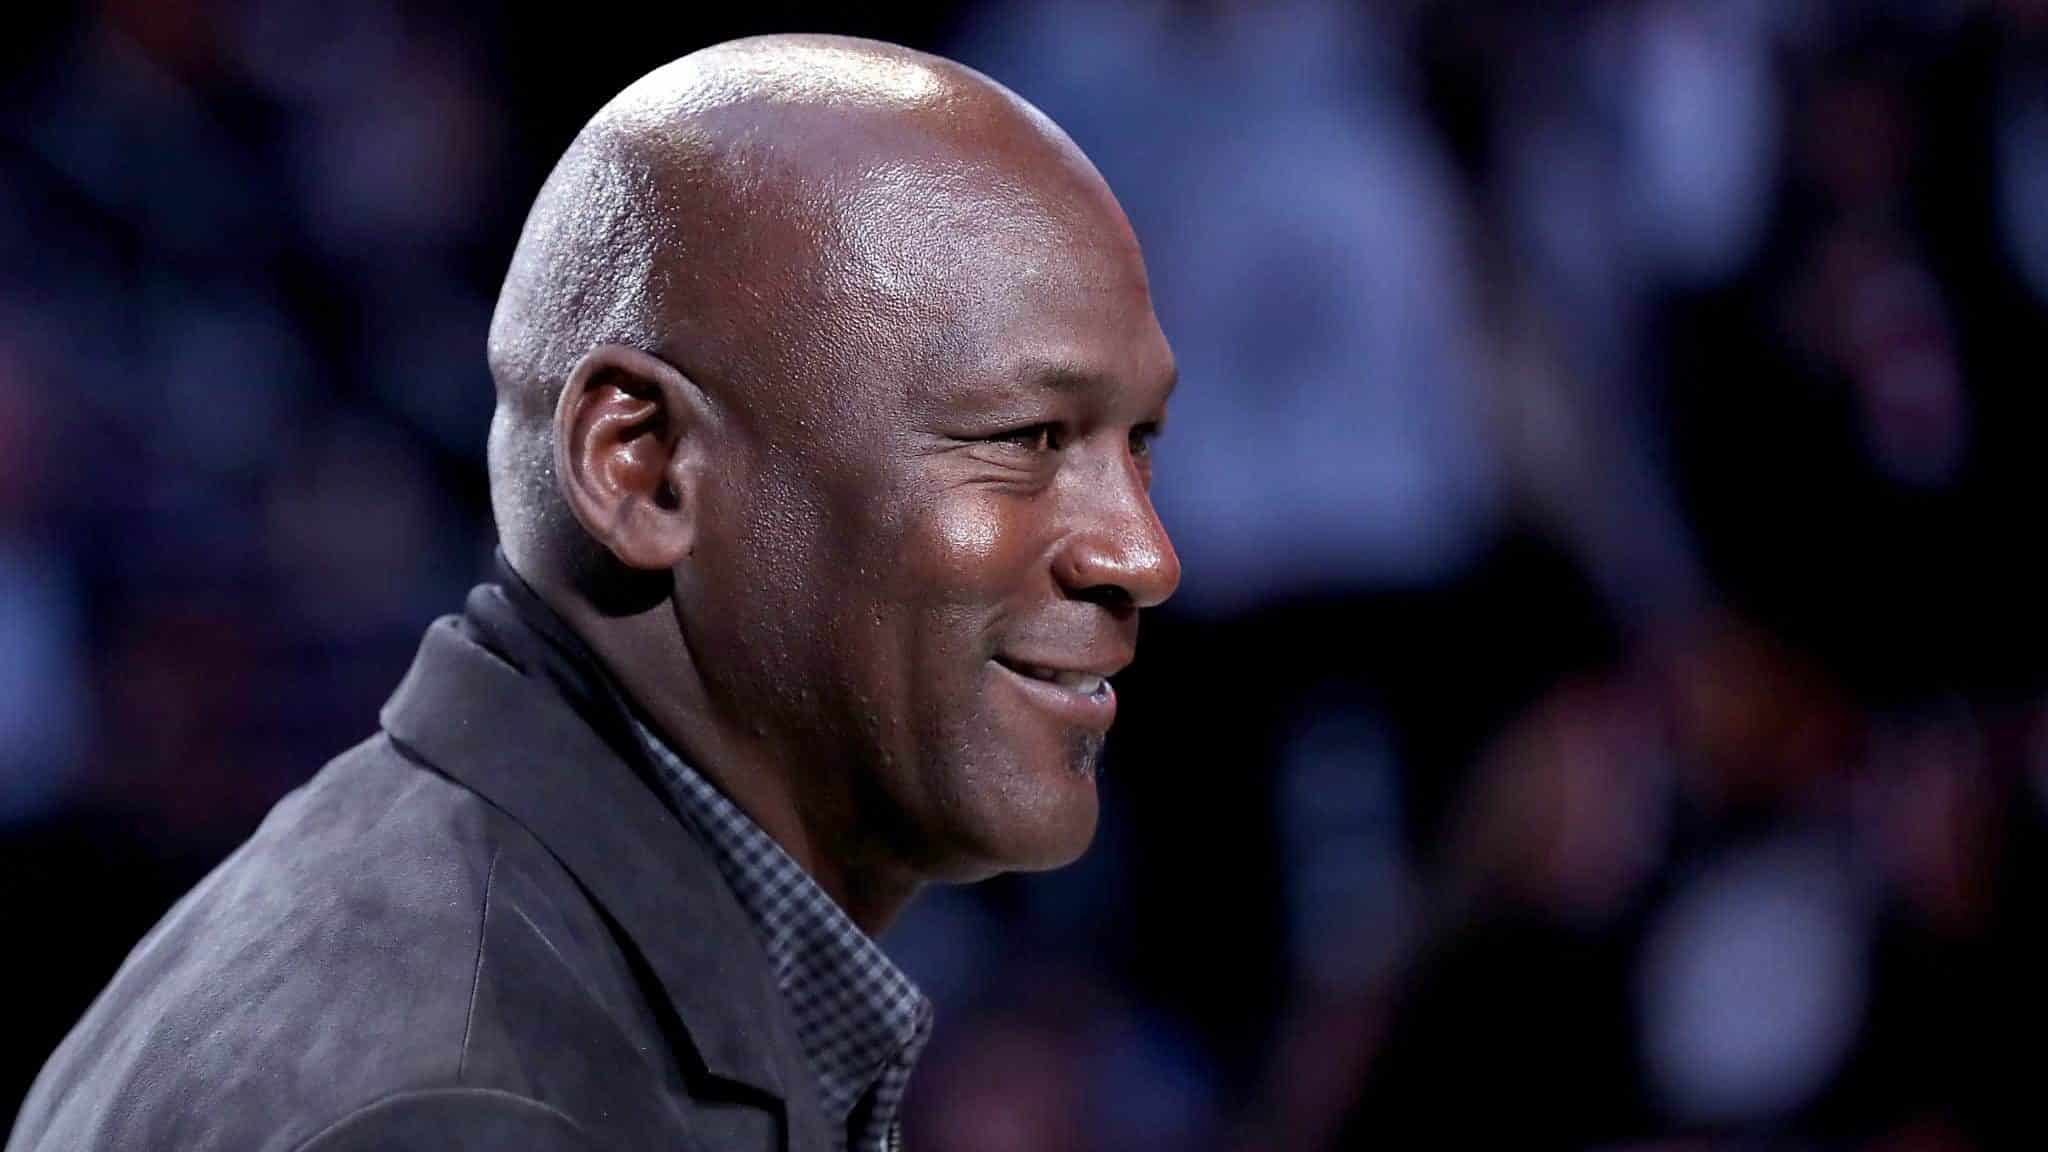 CHARLOTTE, NORTH CAROLINA - FEBRUARY 17: Michael Jordan, owner of the Charlotte Hornets, takes part in a ceremony honoring the 2020 NBA All-Star game during a break in play as Team LeBron take on Team Giannis in the fourth quarter during the NBA All-Star game as part of the 2019 NBA All-Star Weekend at Spectrum Center on February 17, 2019 in Charlotte, North Carolina. Team LeBron won 178-164. NOTE TO USER: User expressly acknowledges and agrees that, by downloading and/or using this photograph, user is consenting to the terms and conditions of the Getty Images License Agreement.